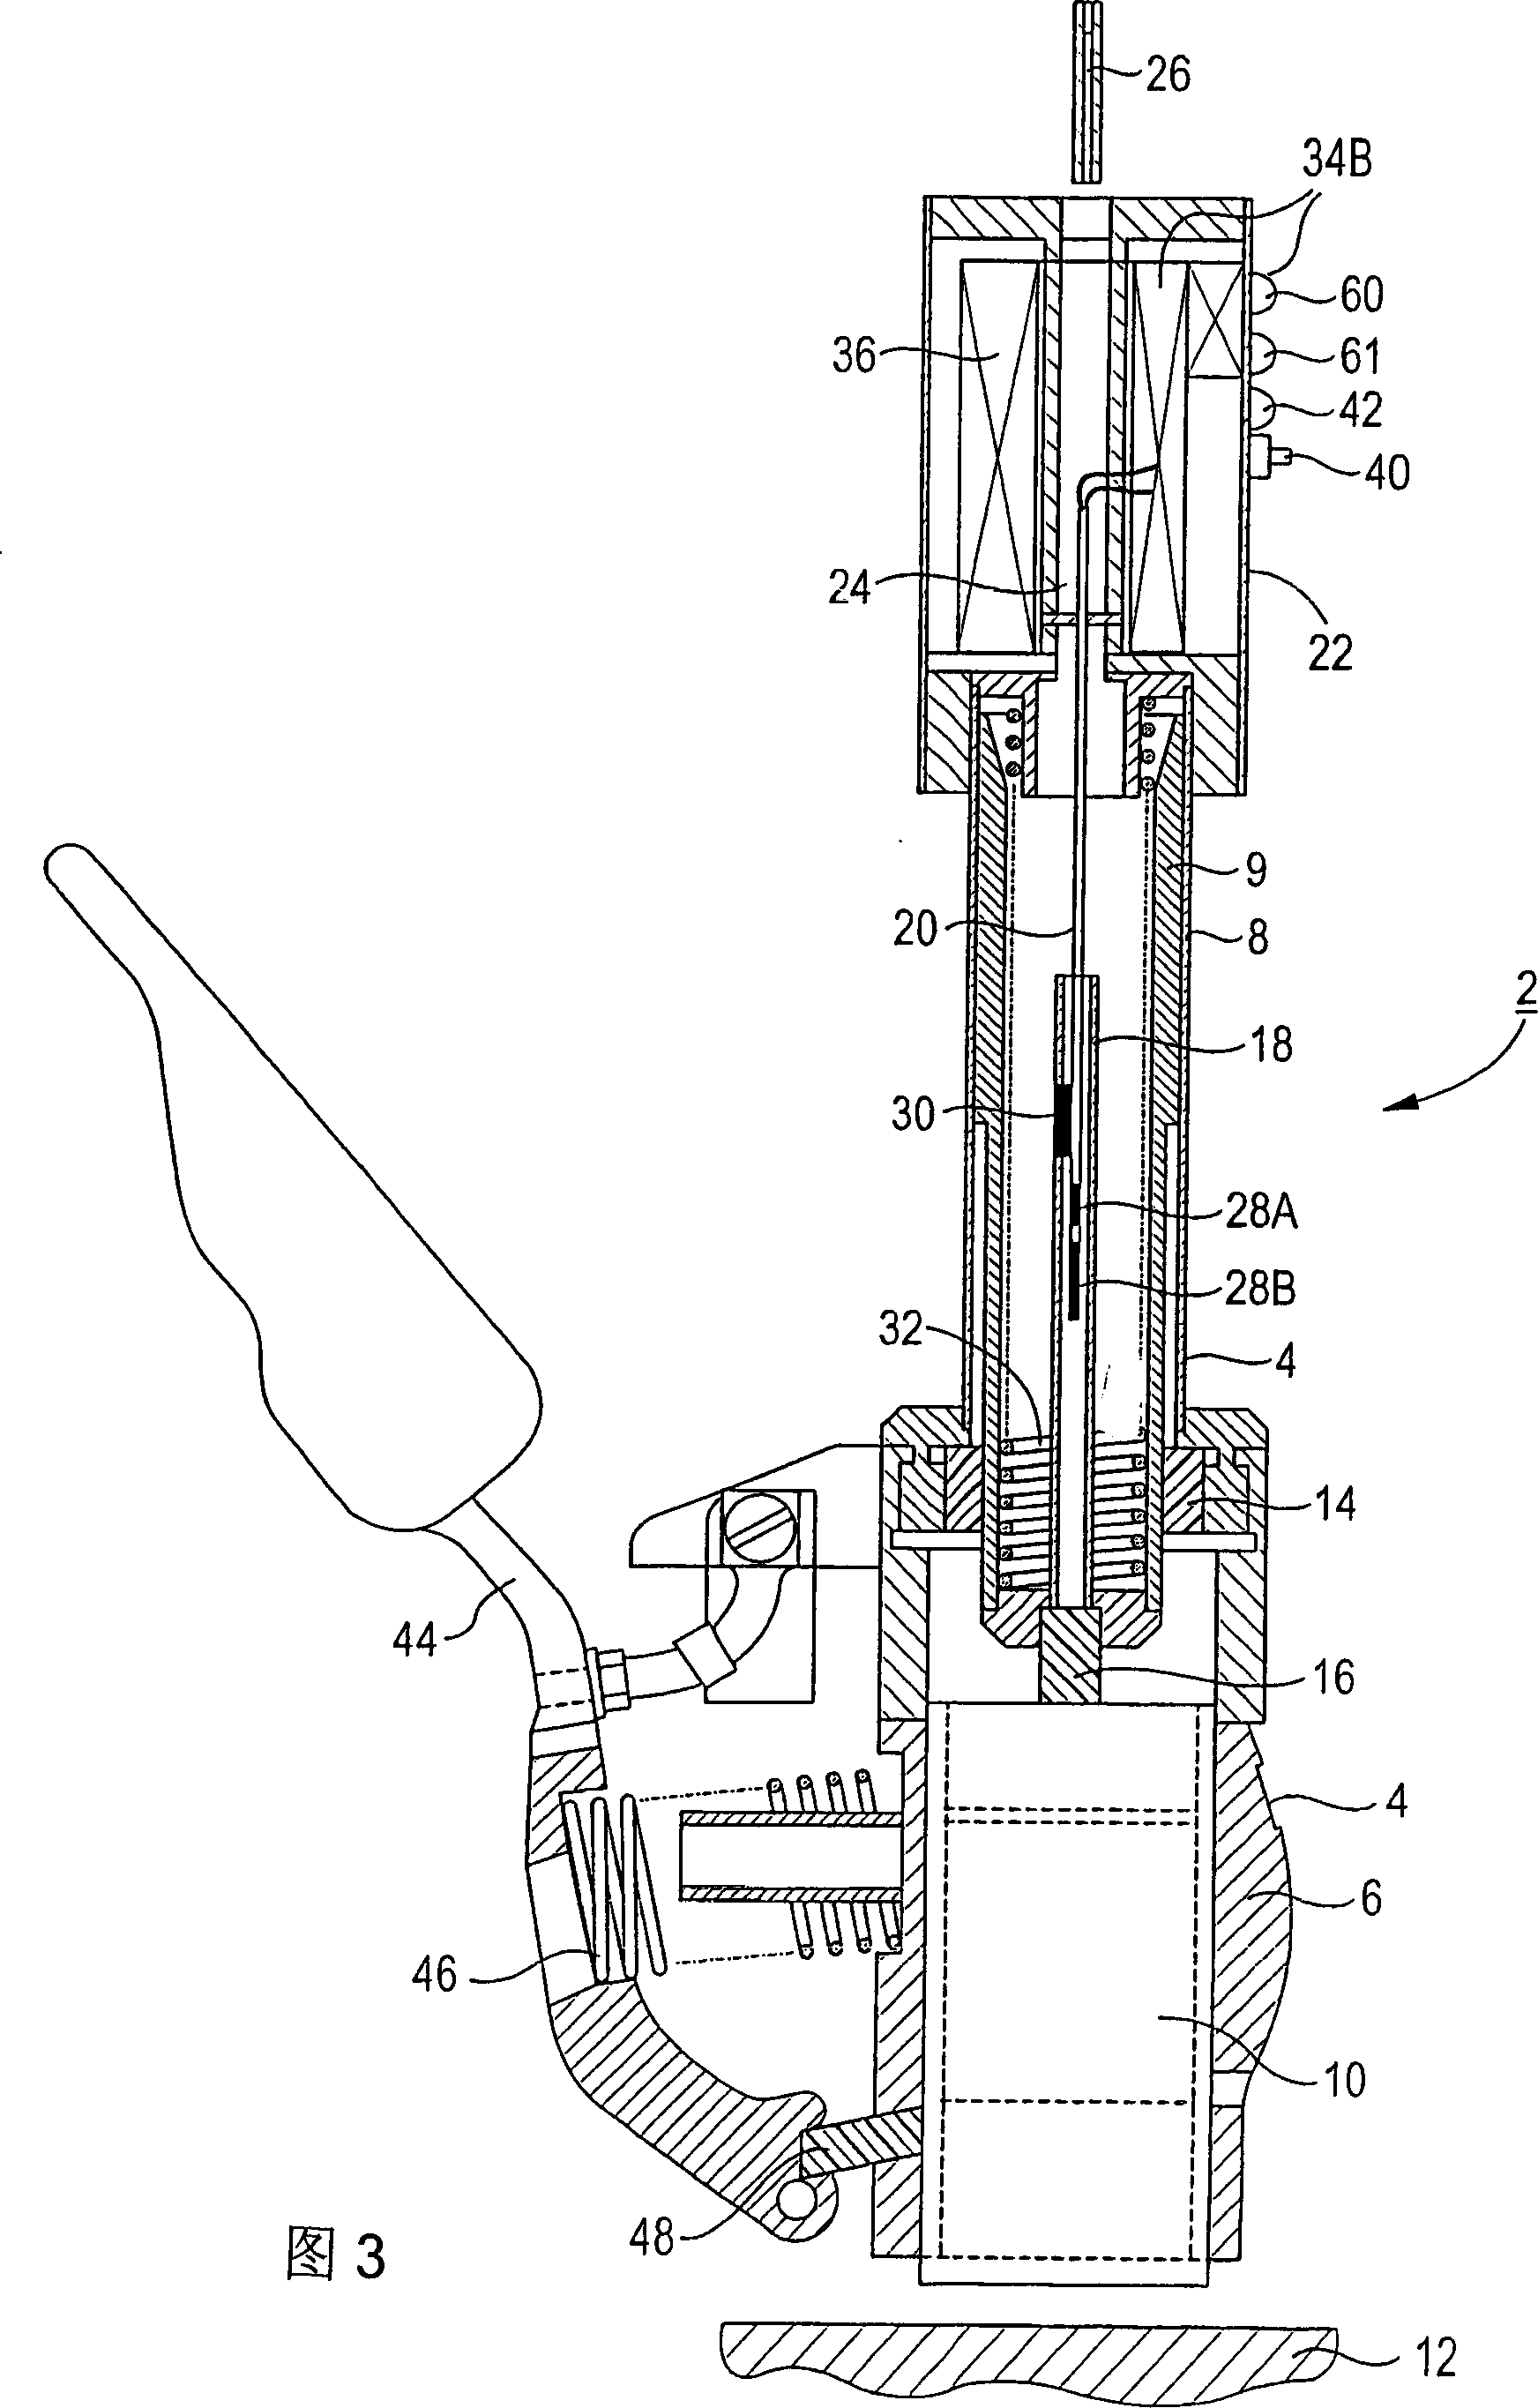 Apparatus for detecting sliding contact parts of electric rotary equipment